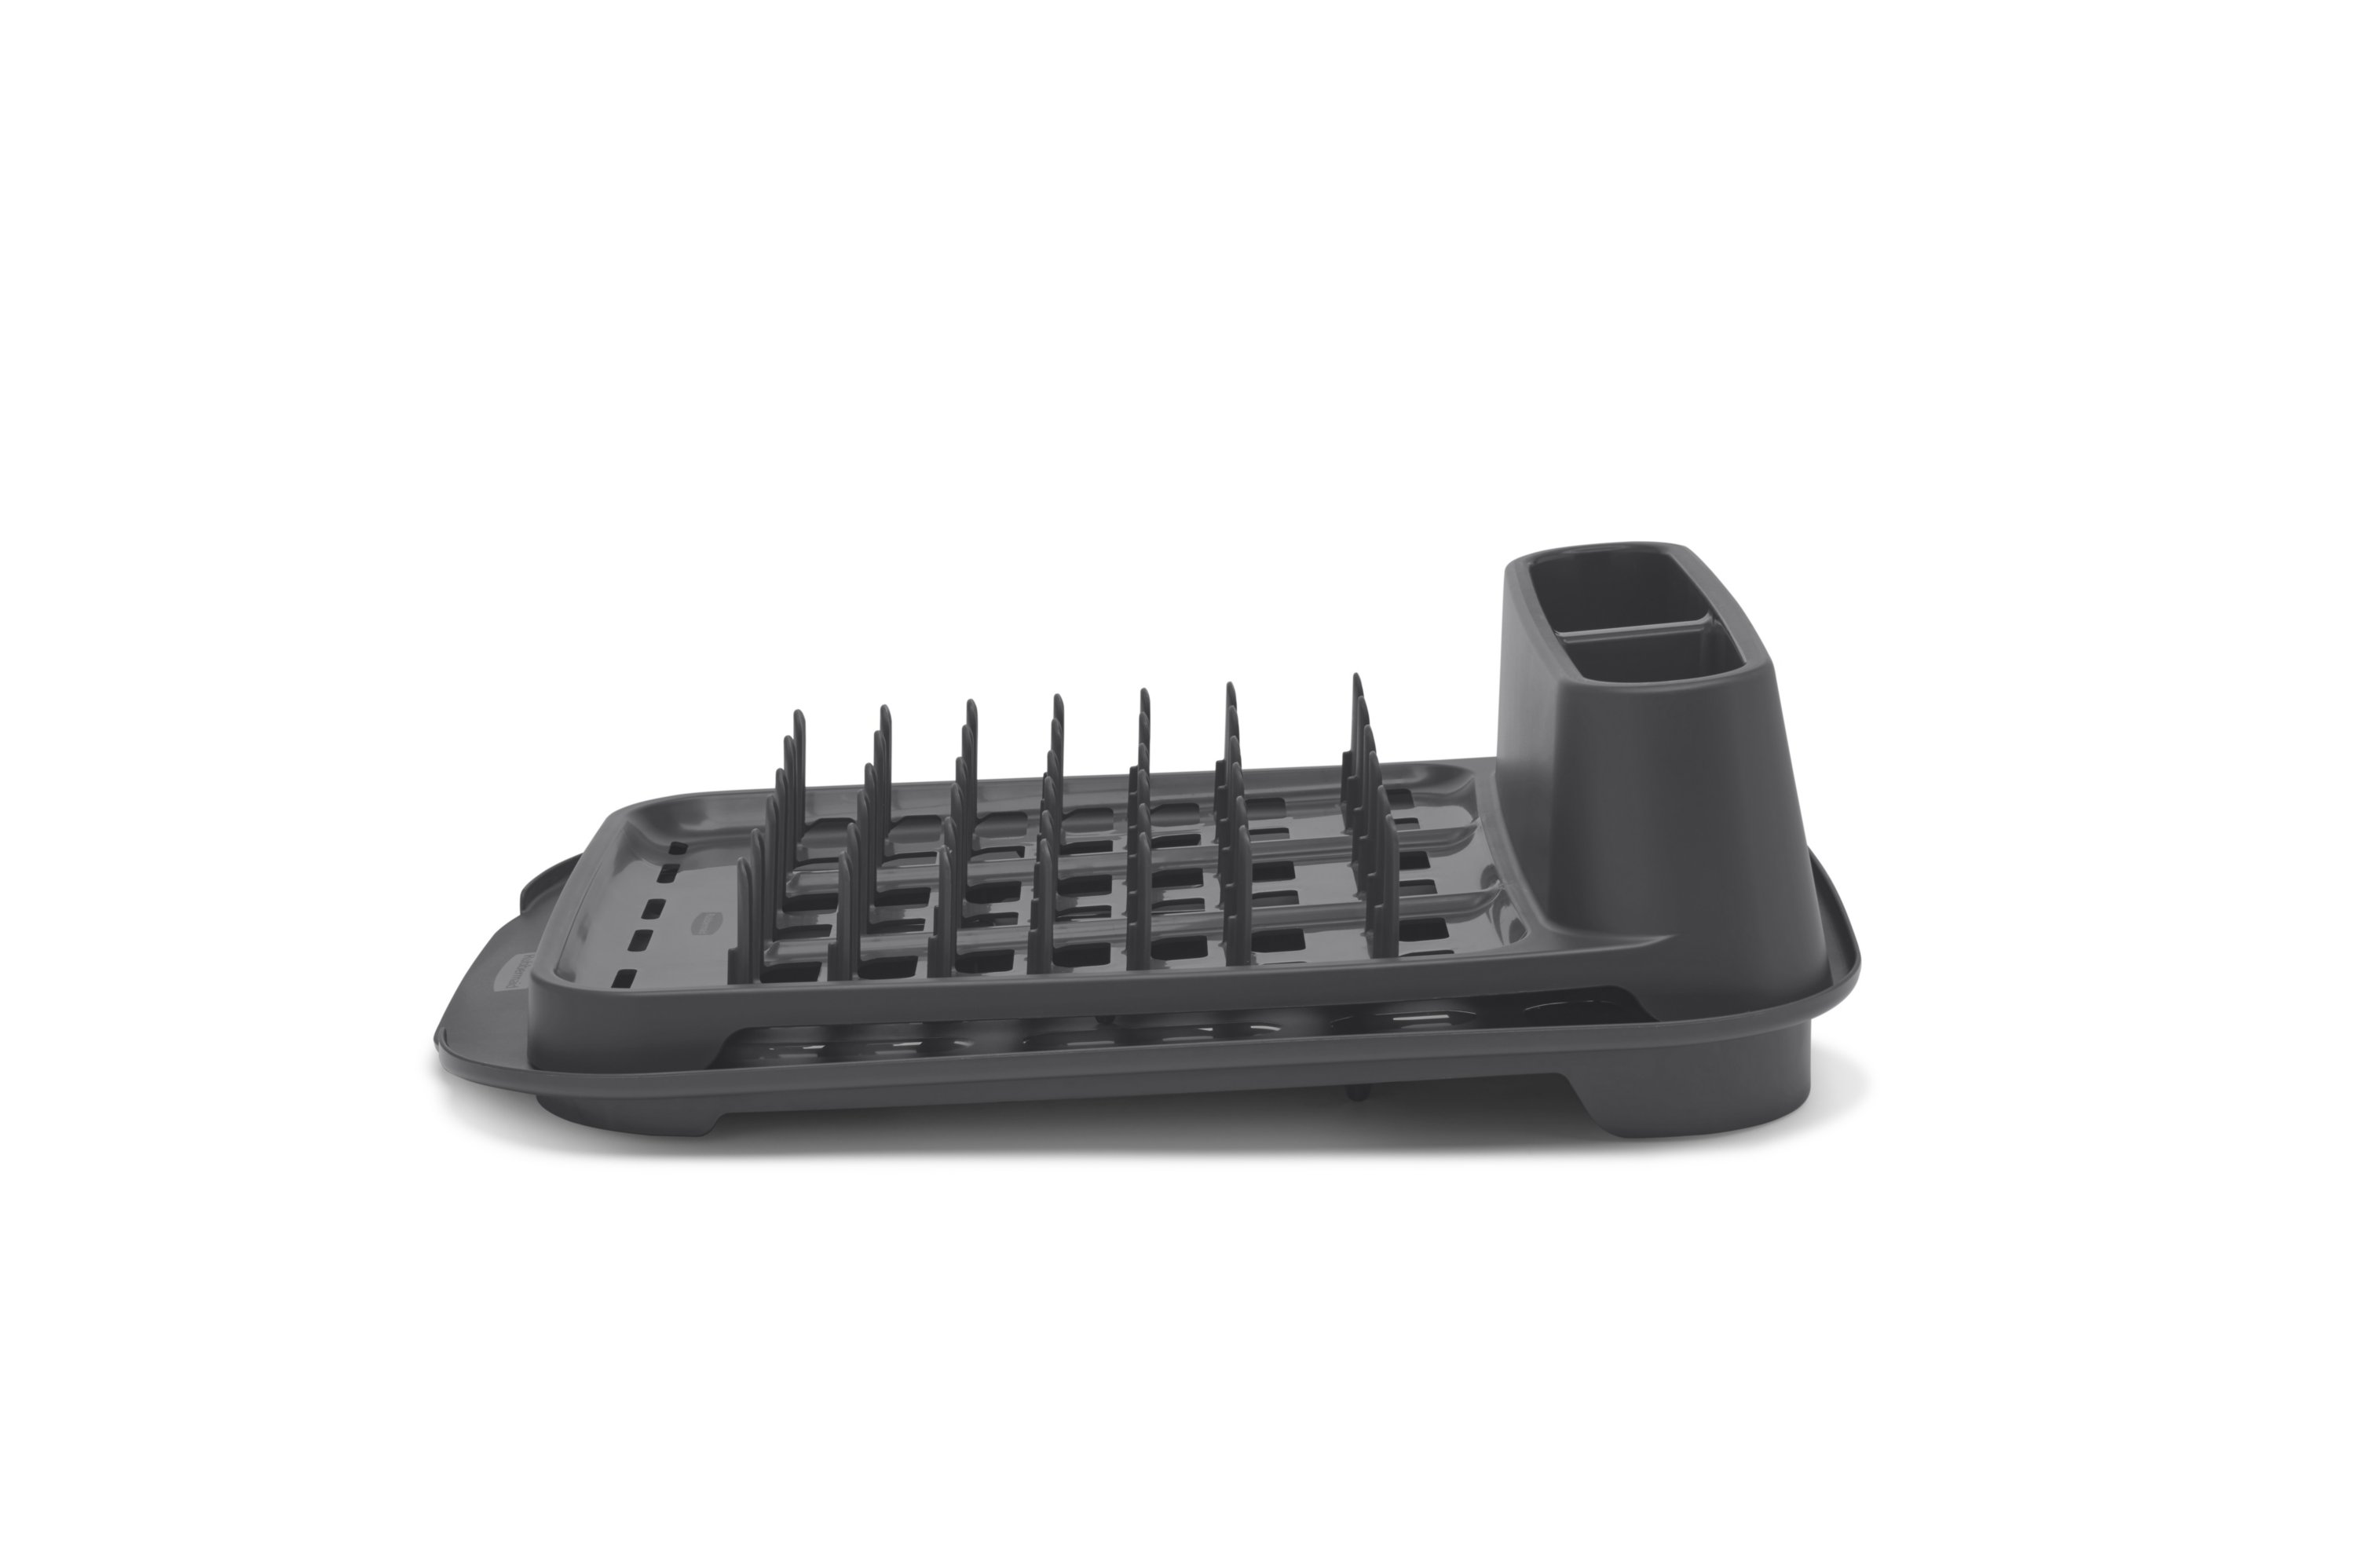 Rubbermaid Dish Drainer 21044 – Good's Store Online